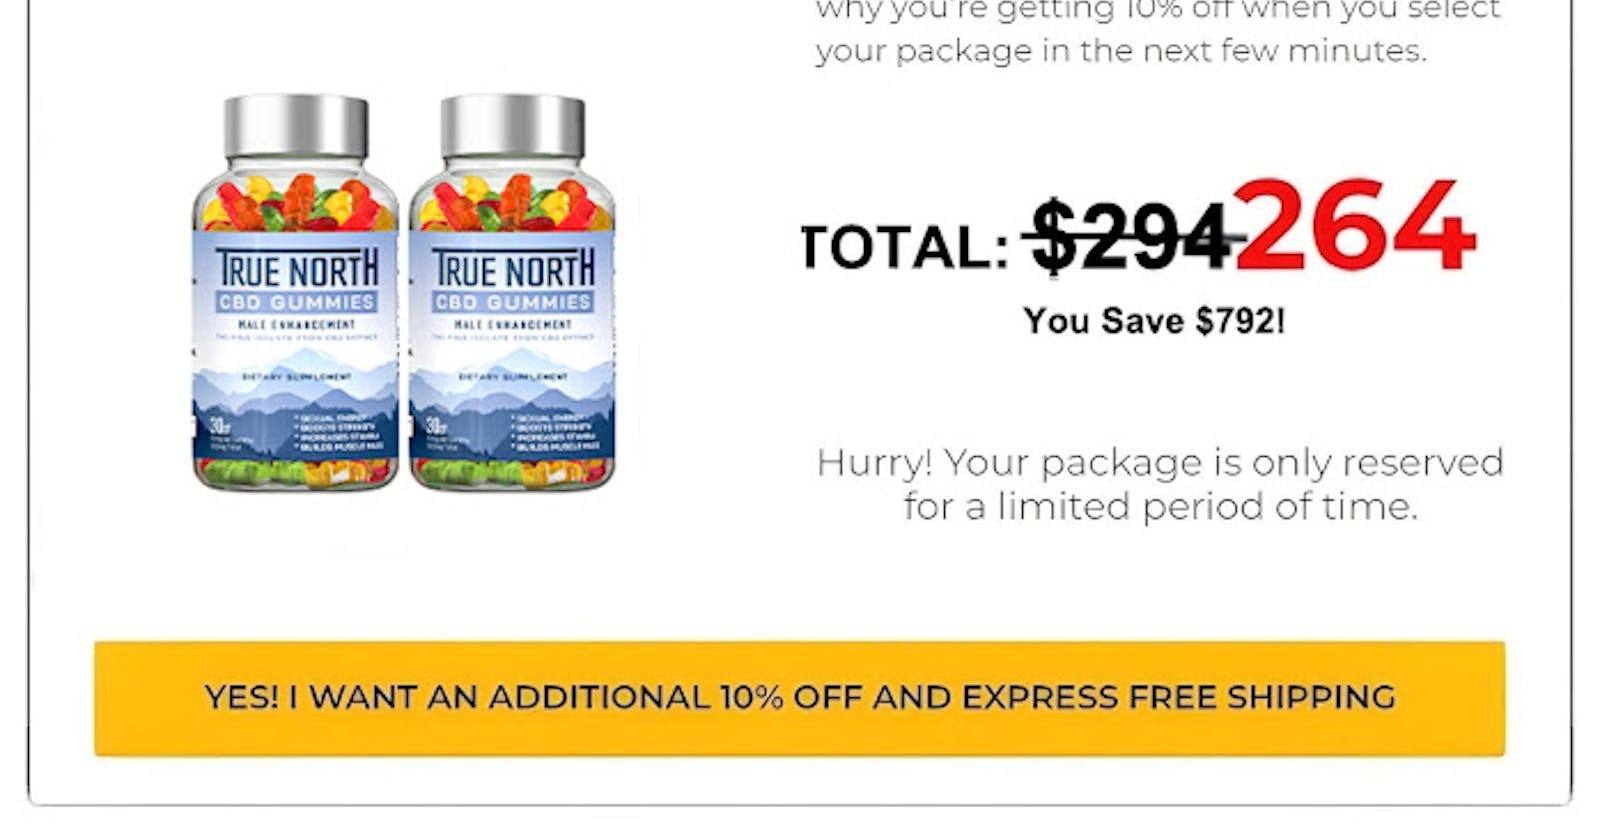 True North CBD Gummies Male Enhancement - Improved Natural Health Today!